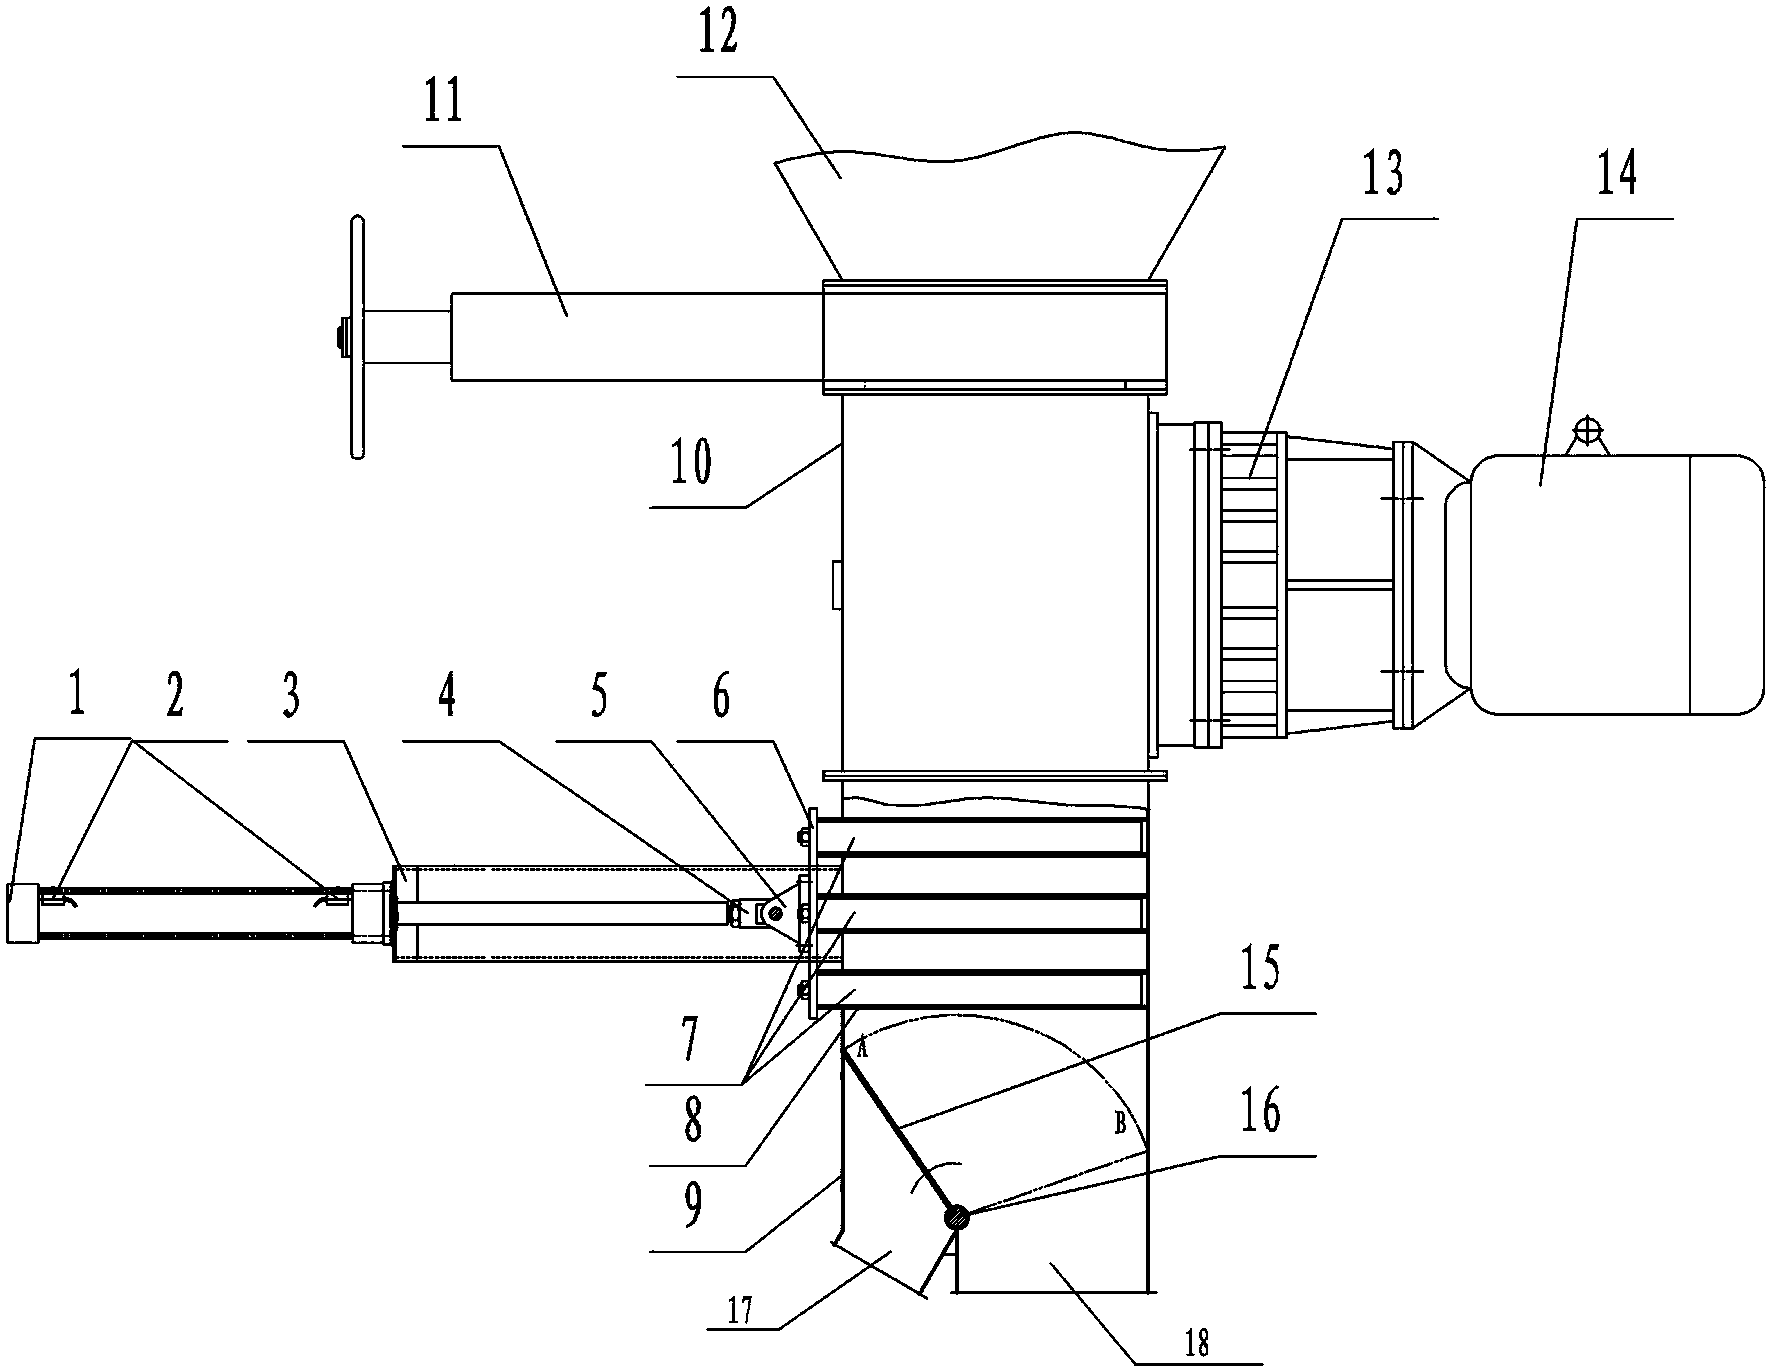 Apparatus for removing iron in powder